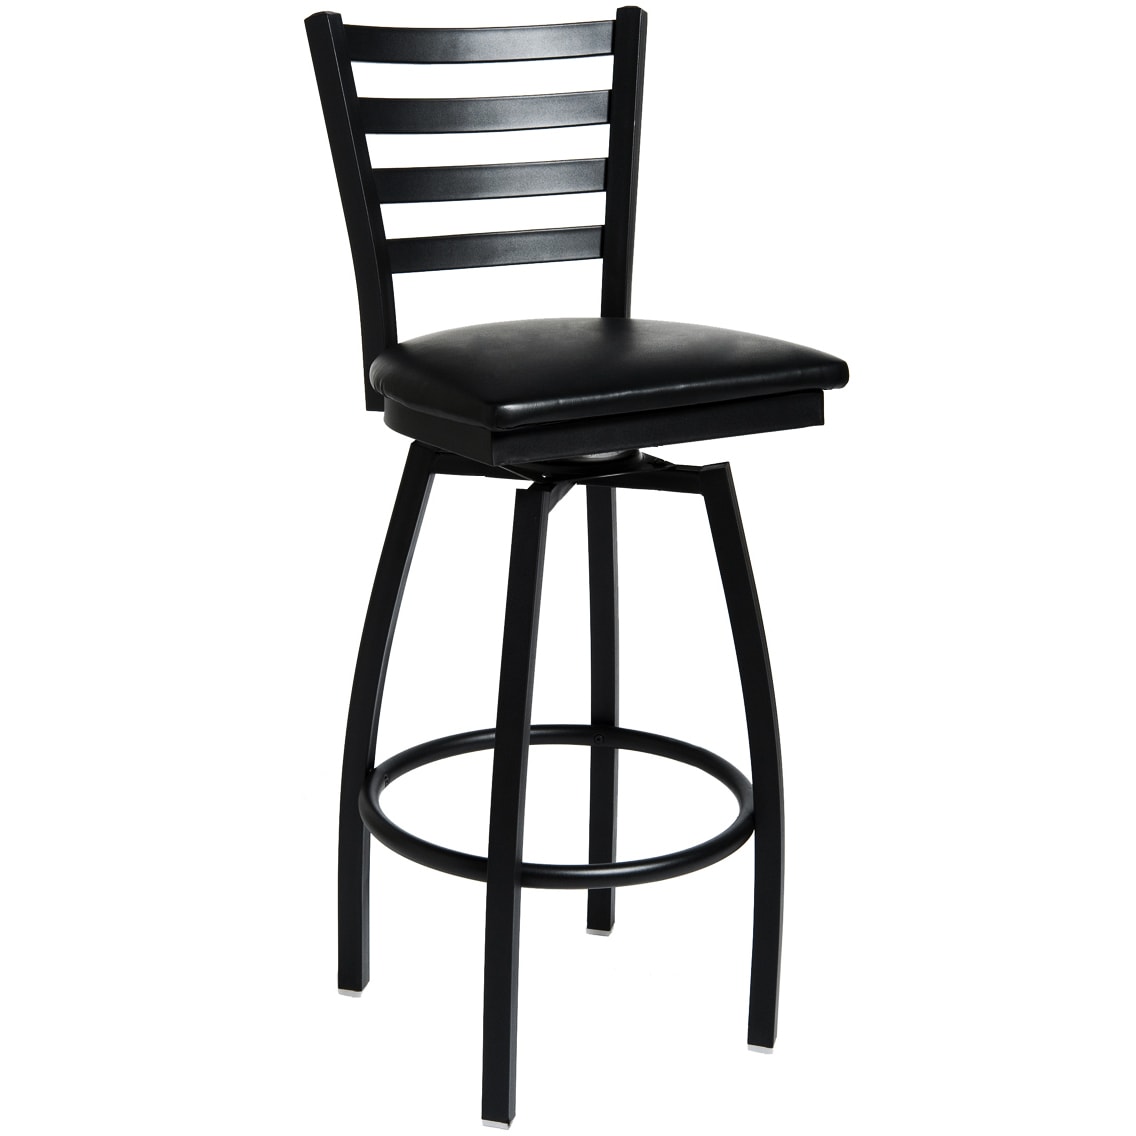 Swivel Ladder Back Metal Bar Stool, Metal Bar Stools With Arms And Swivel